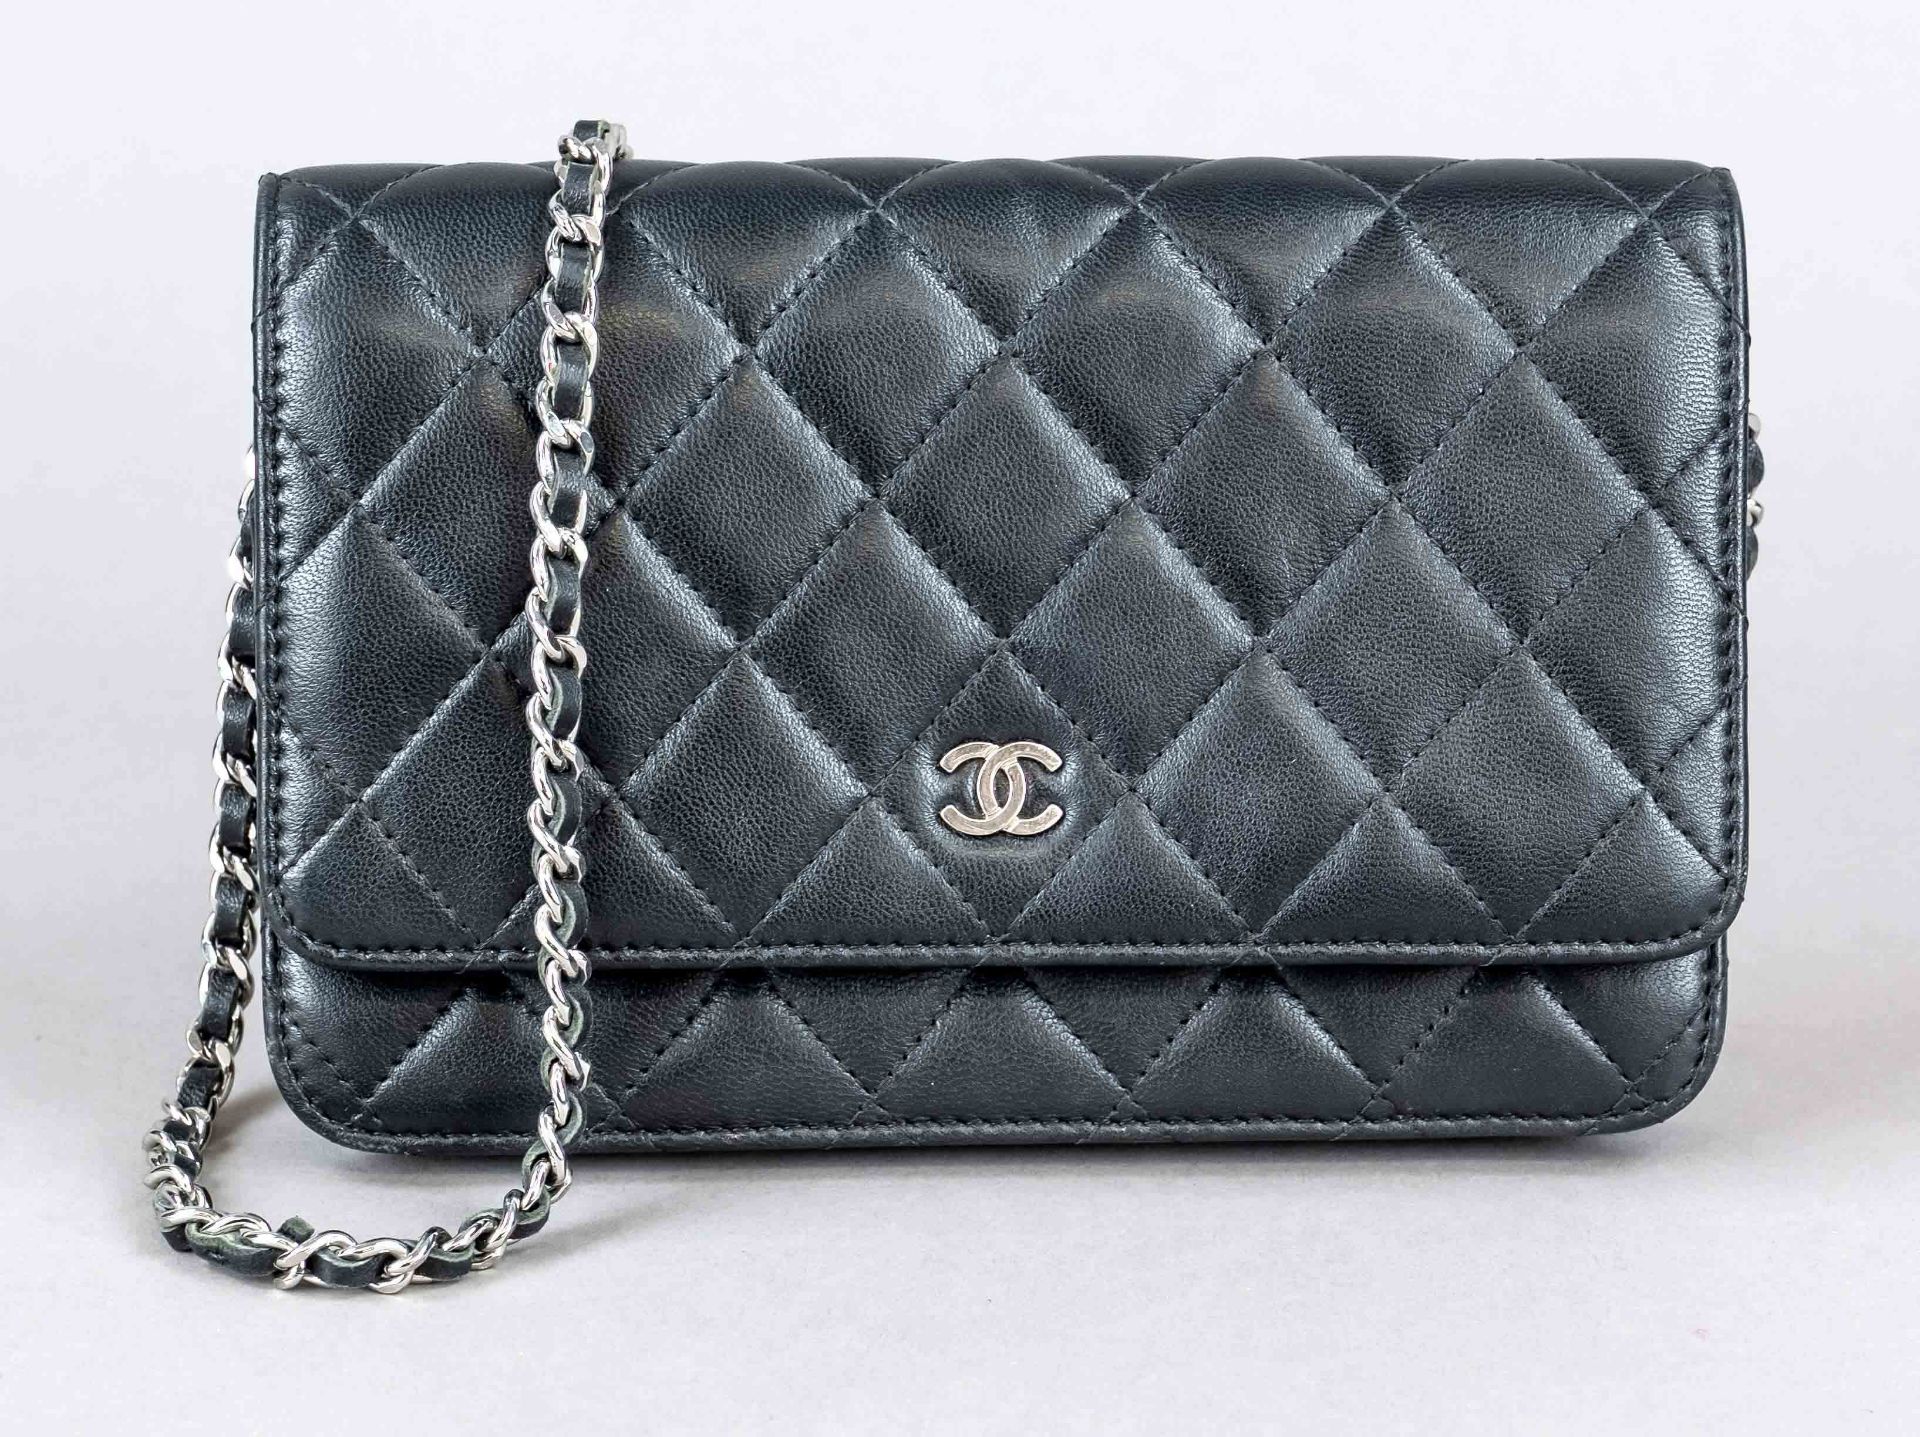 Chanel, Black Quilted Lambskin